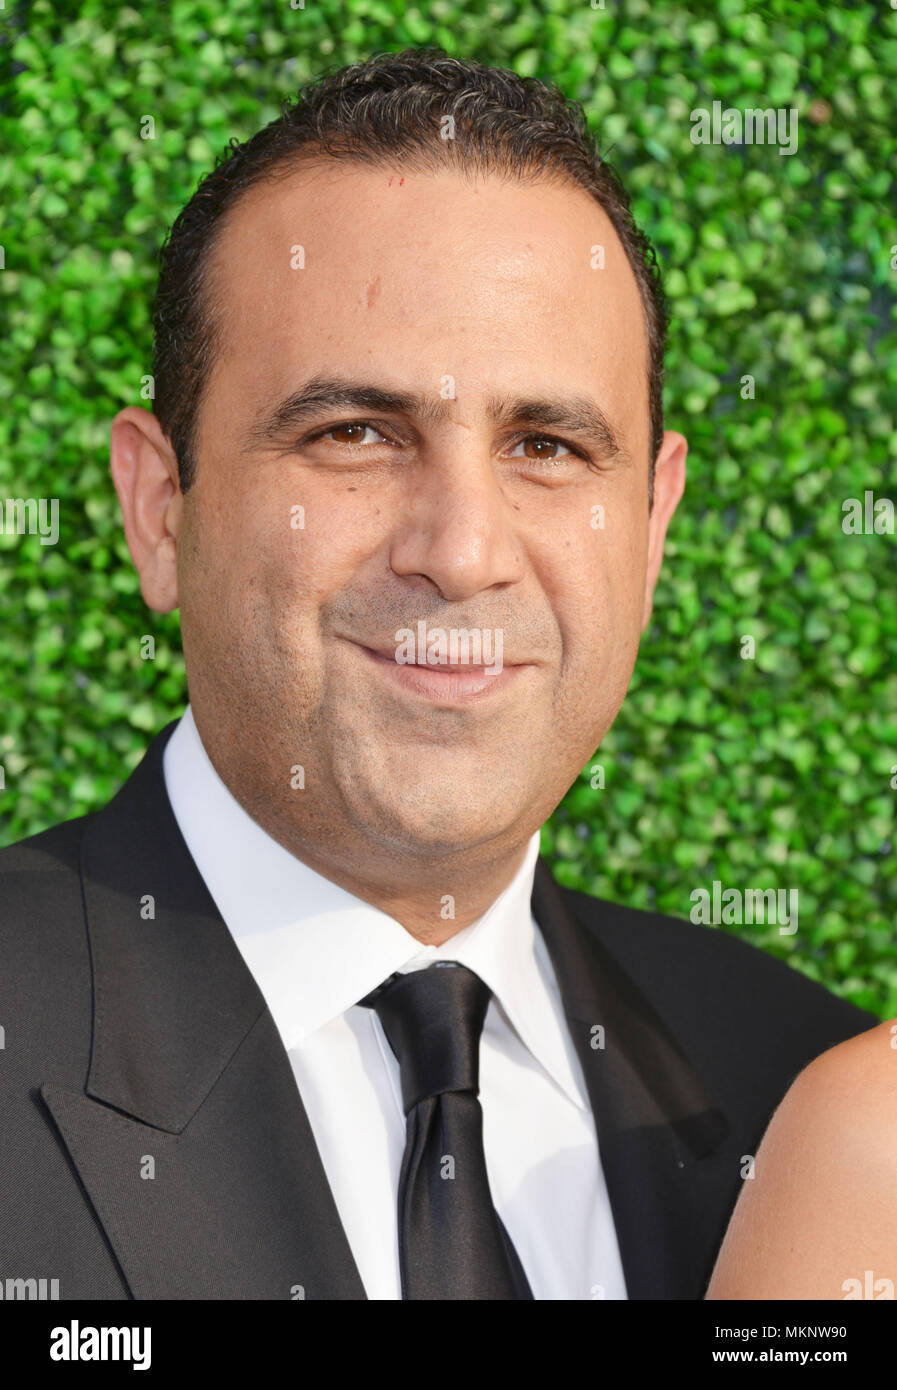 Sam Nazarian 104 at the UCLA Israel Studies Awards at the Annenberg Center for Performing Arts in Beverly Hills. May, 5, 2015.Sam Nazarian 104  Event in Hollywood Life - California,  Red Carpet Event, Vertical, USA, Film Industry, Celebrities,  Photography, Bestof, Arts Culture and Entertainment, Topix Celebrities fashion / one person, Vertical, Best of, Hollywood Life, Event in Hollywood Life - California,  Red Carpet and backstage, USA, Film Industry, Celebrities,  movie celebrities, TV celebrities, Music celebrities, Photography, Bestof, Arts Culture and Entertainment,  Topix, headshot, ver Stock Photo